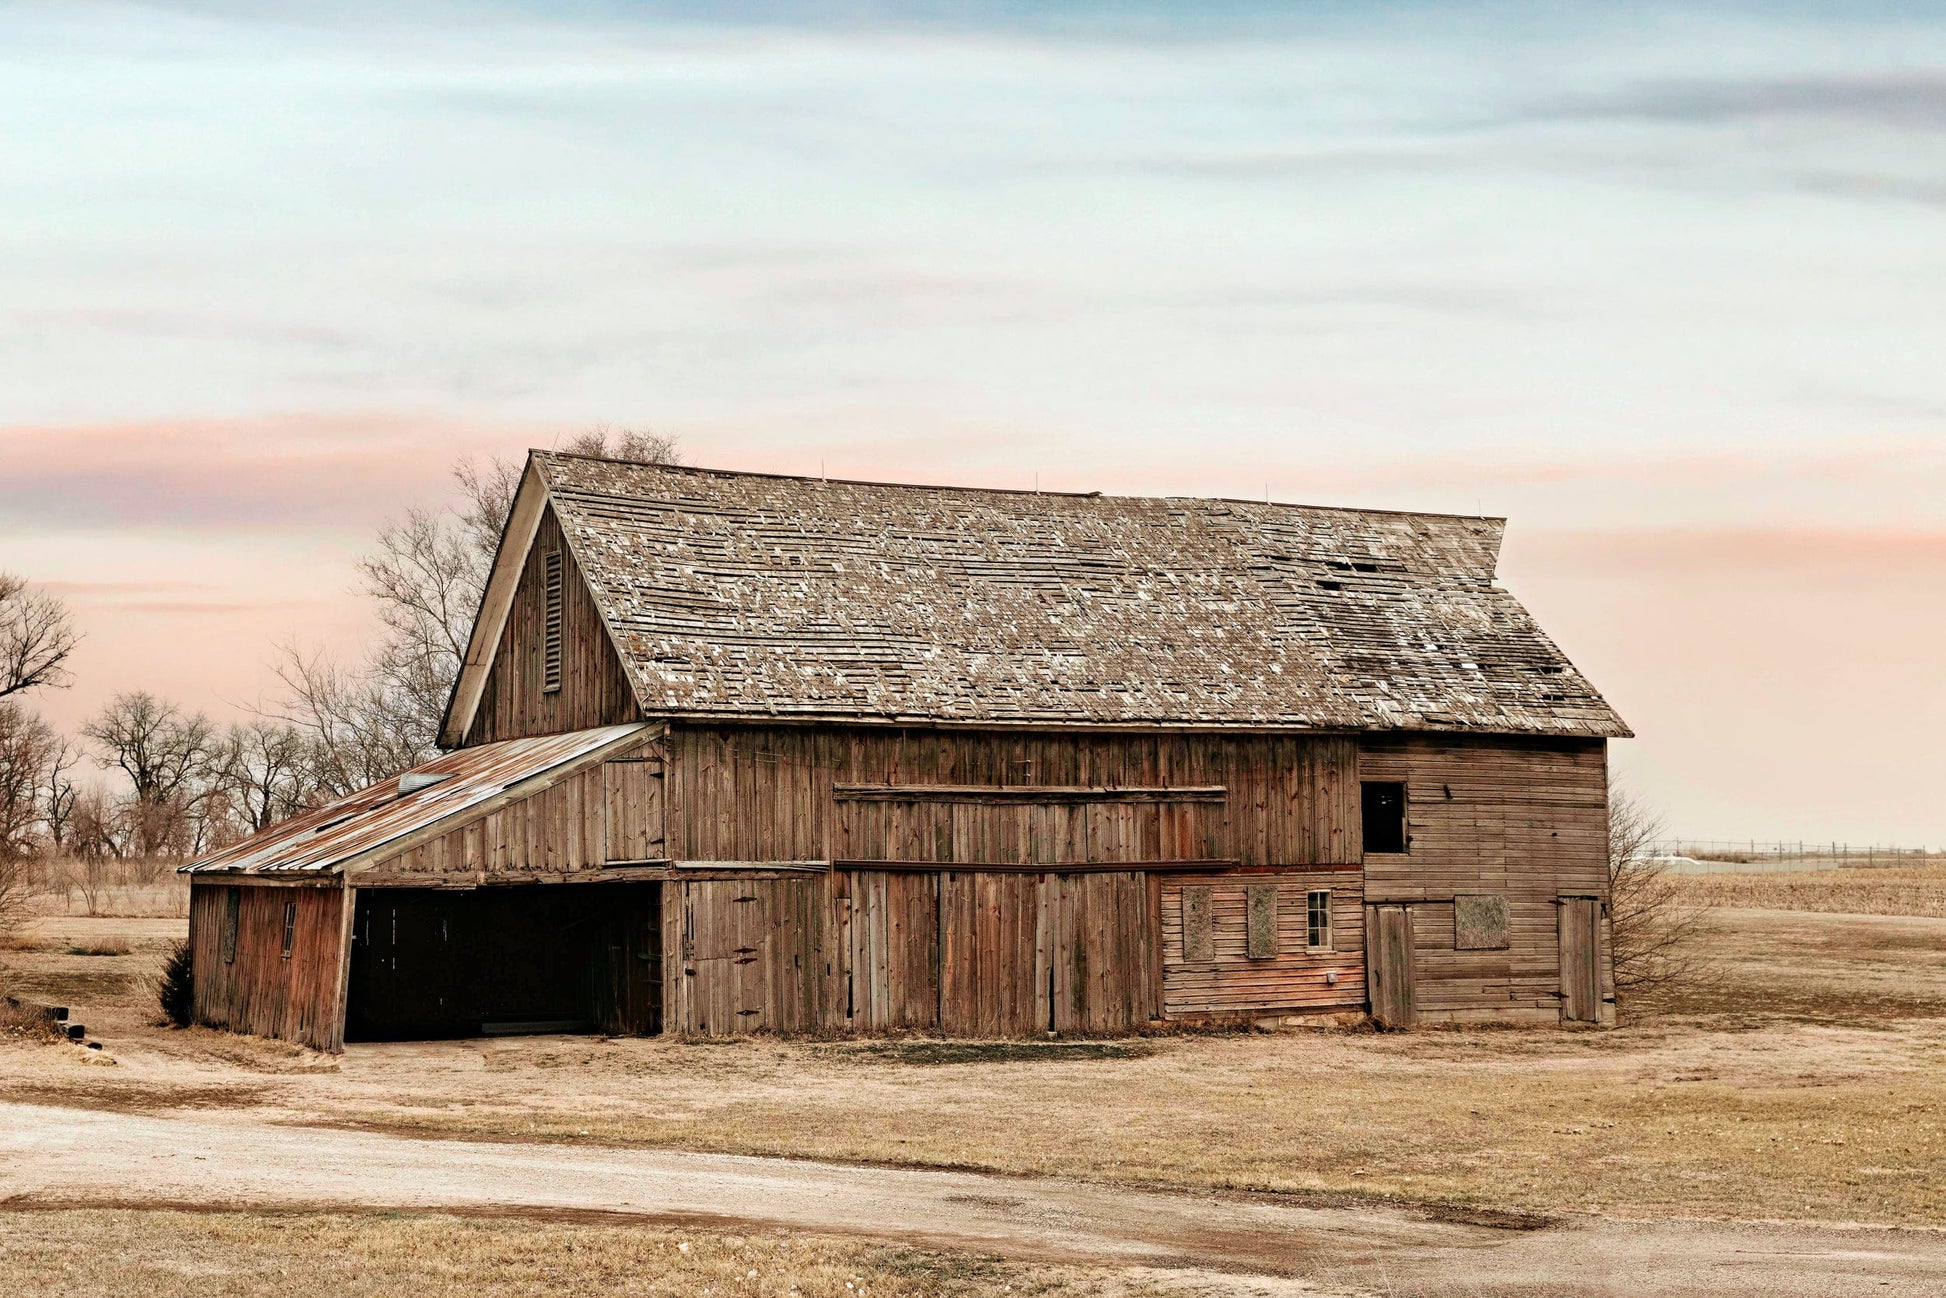 Teri James Photography Wall Art Paper Photo Print / 12 x 18 Inches Old Barn with Wooden Roof